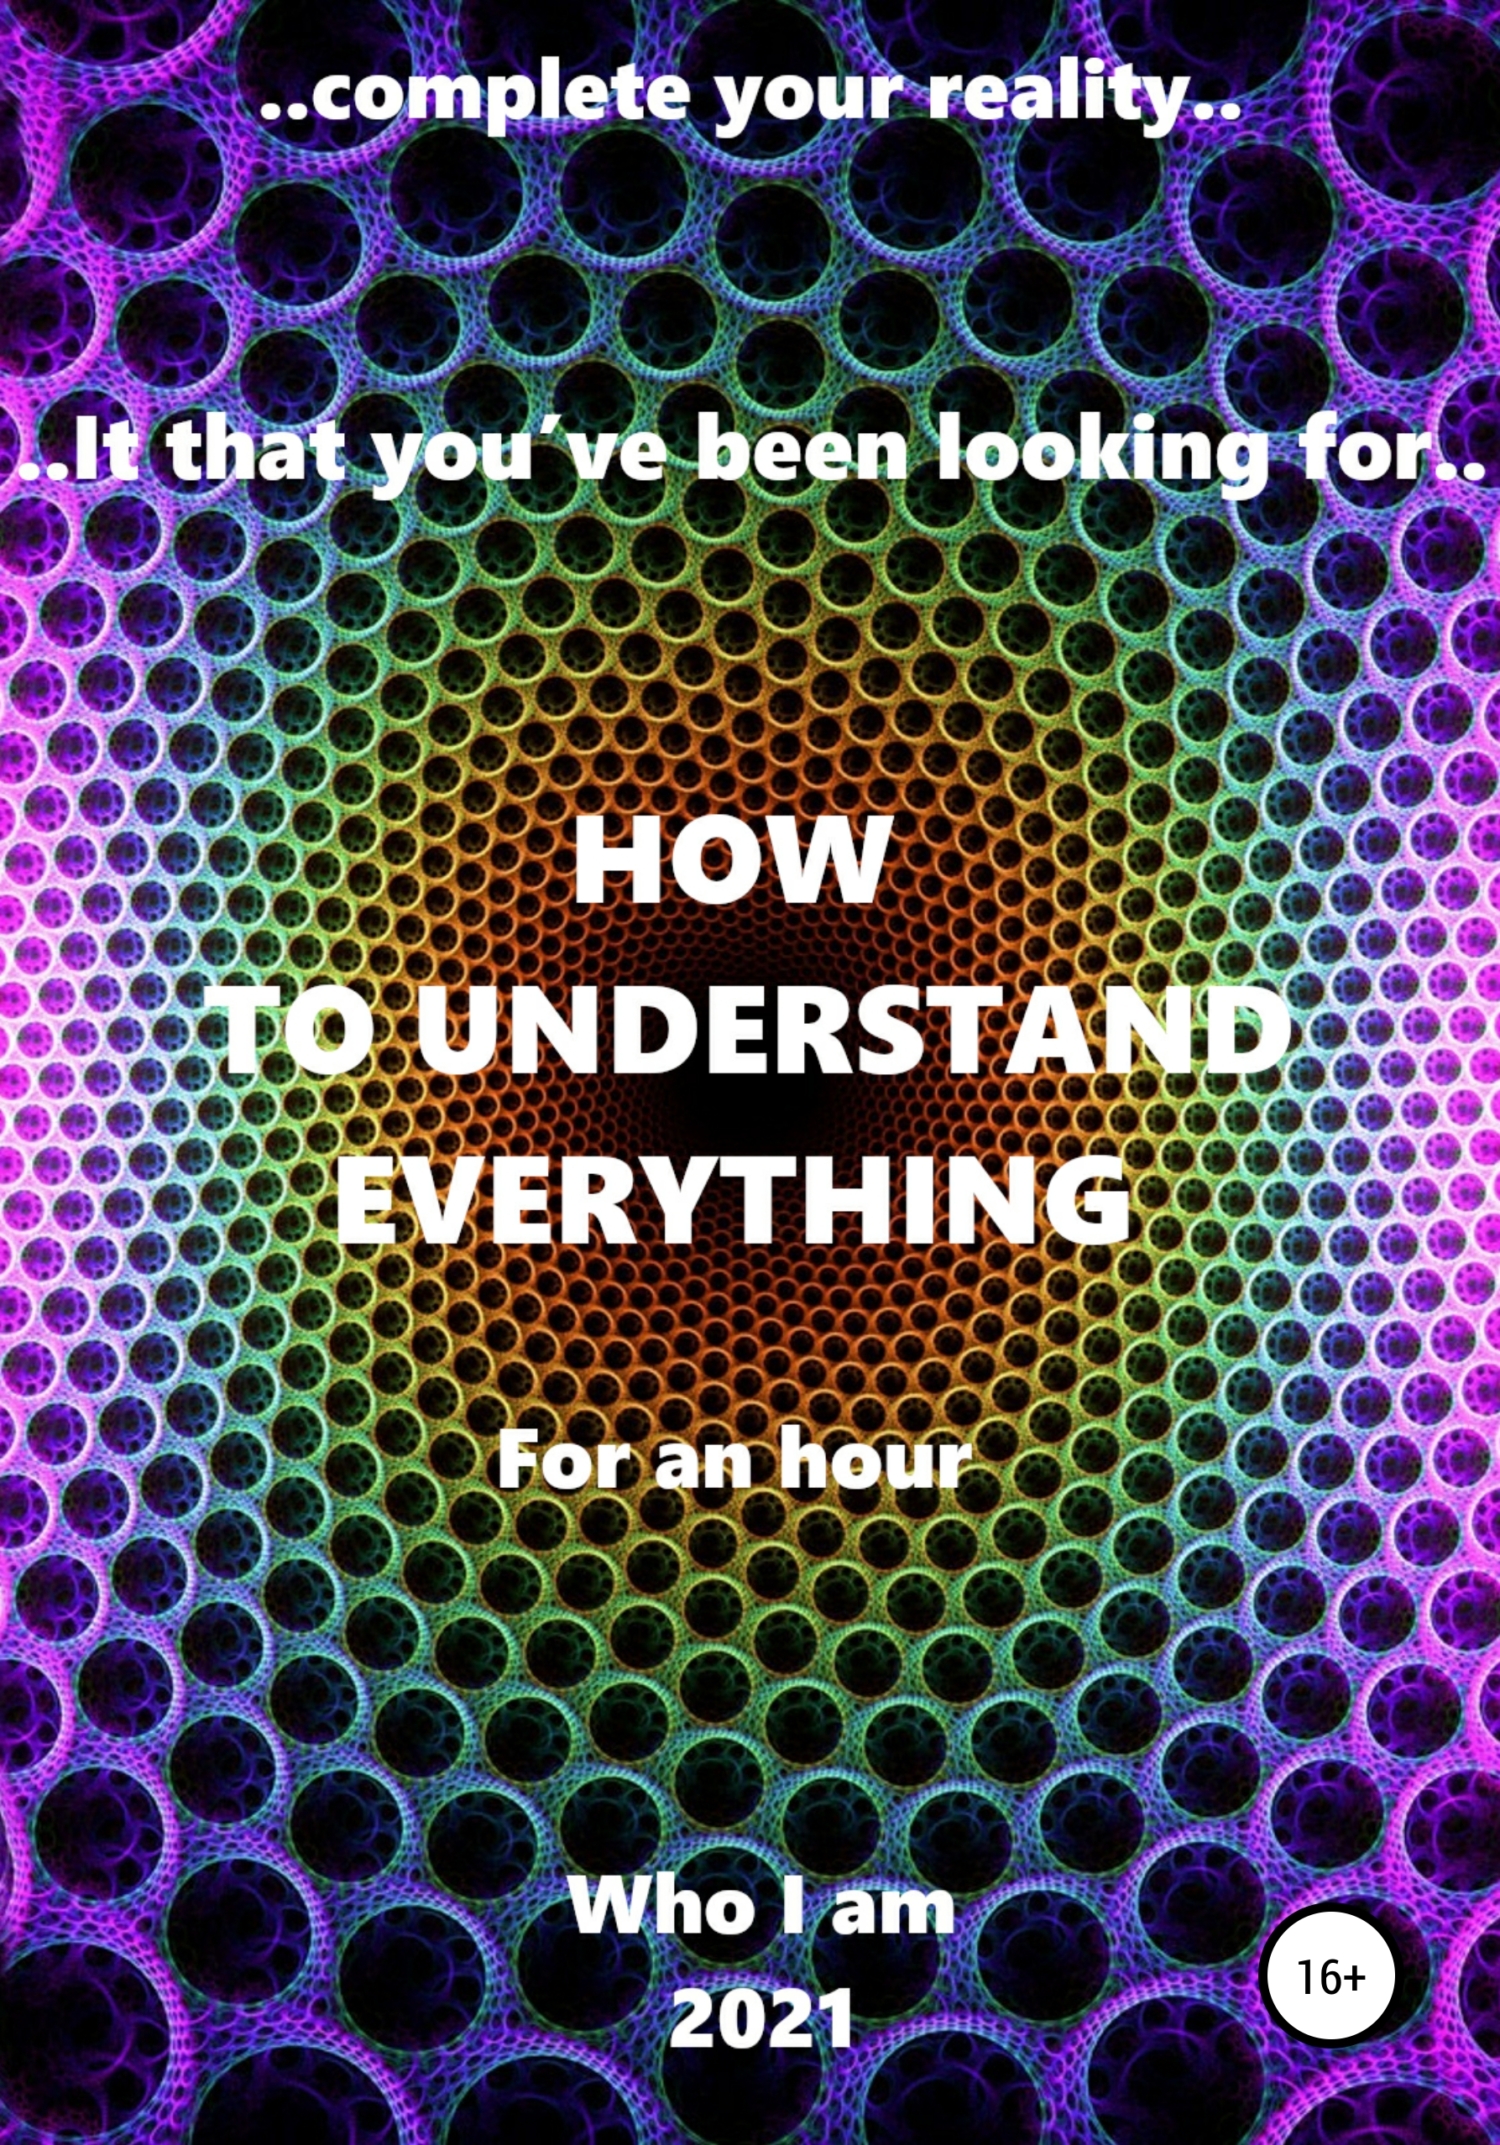 How to understand everything (fb2)